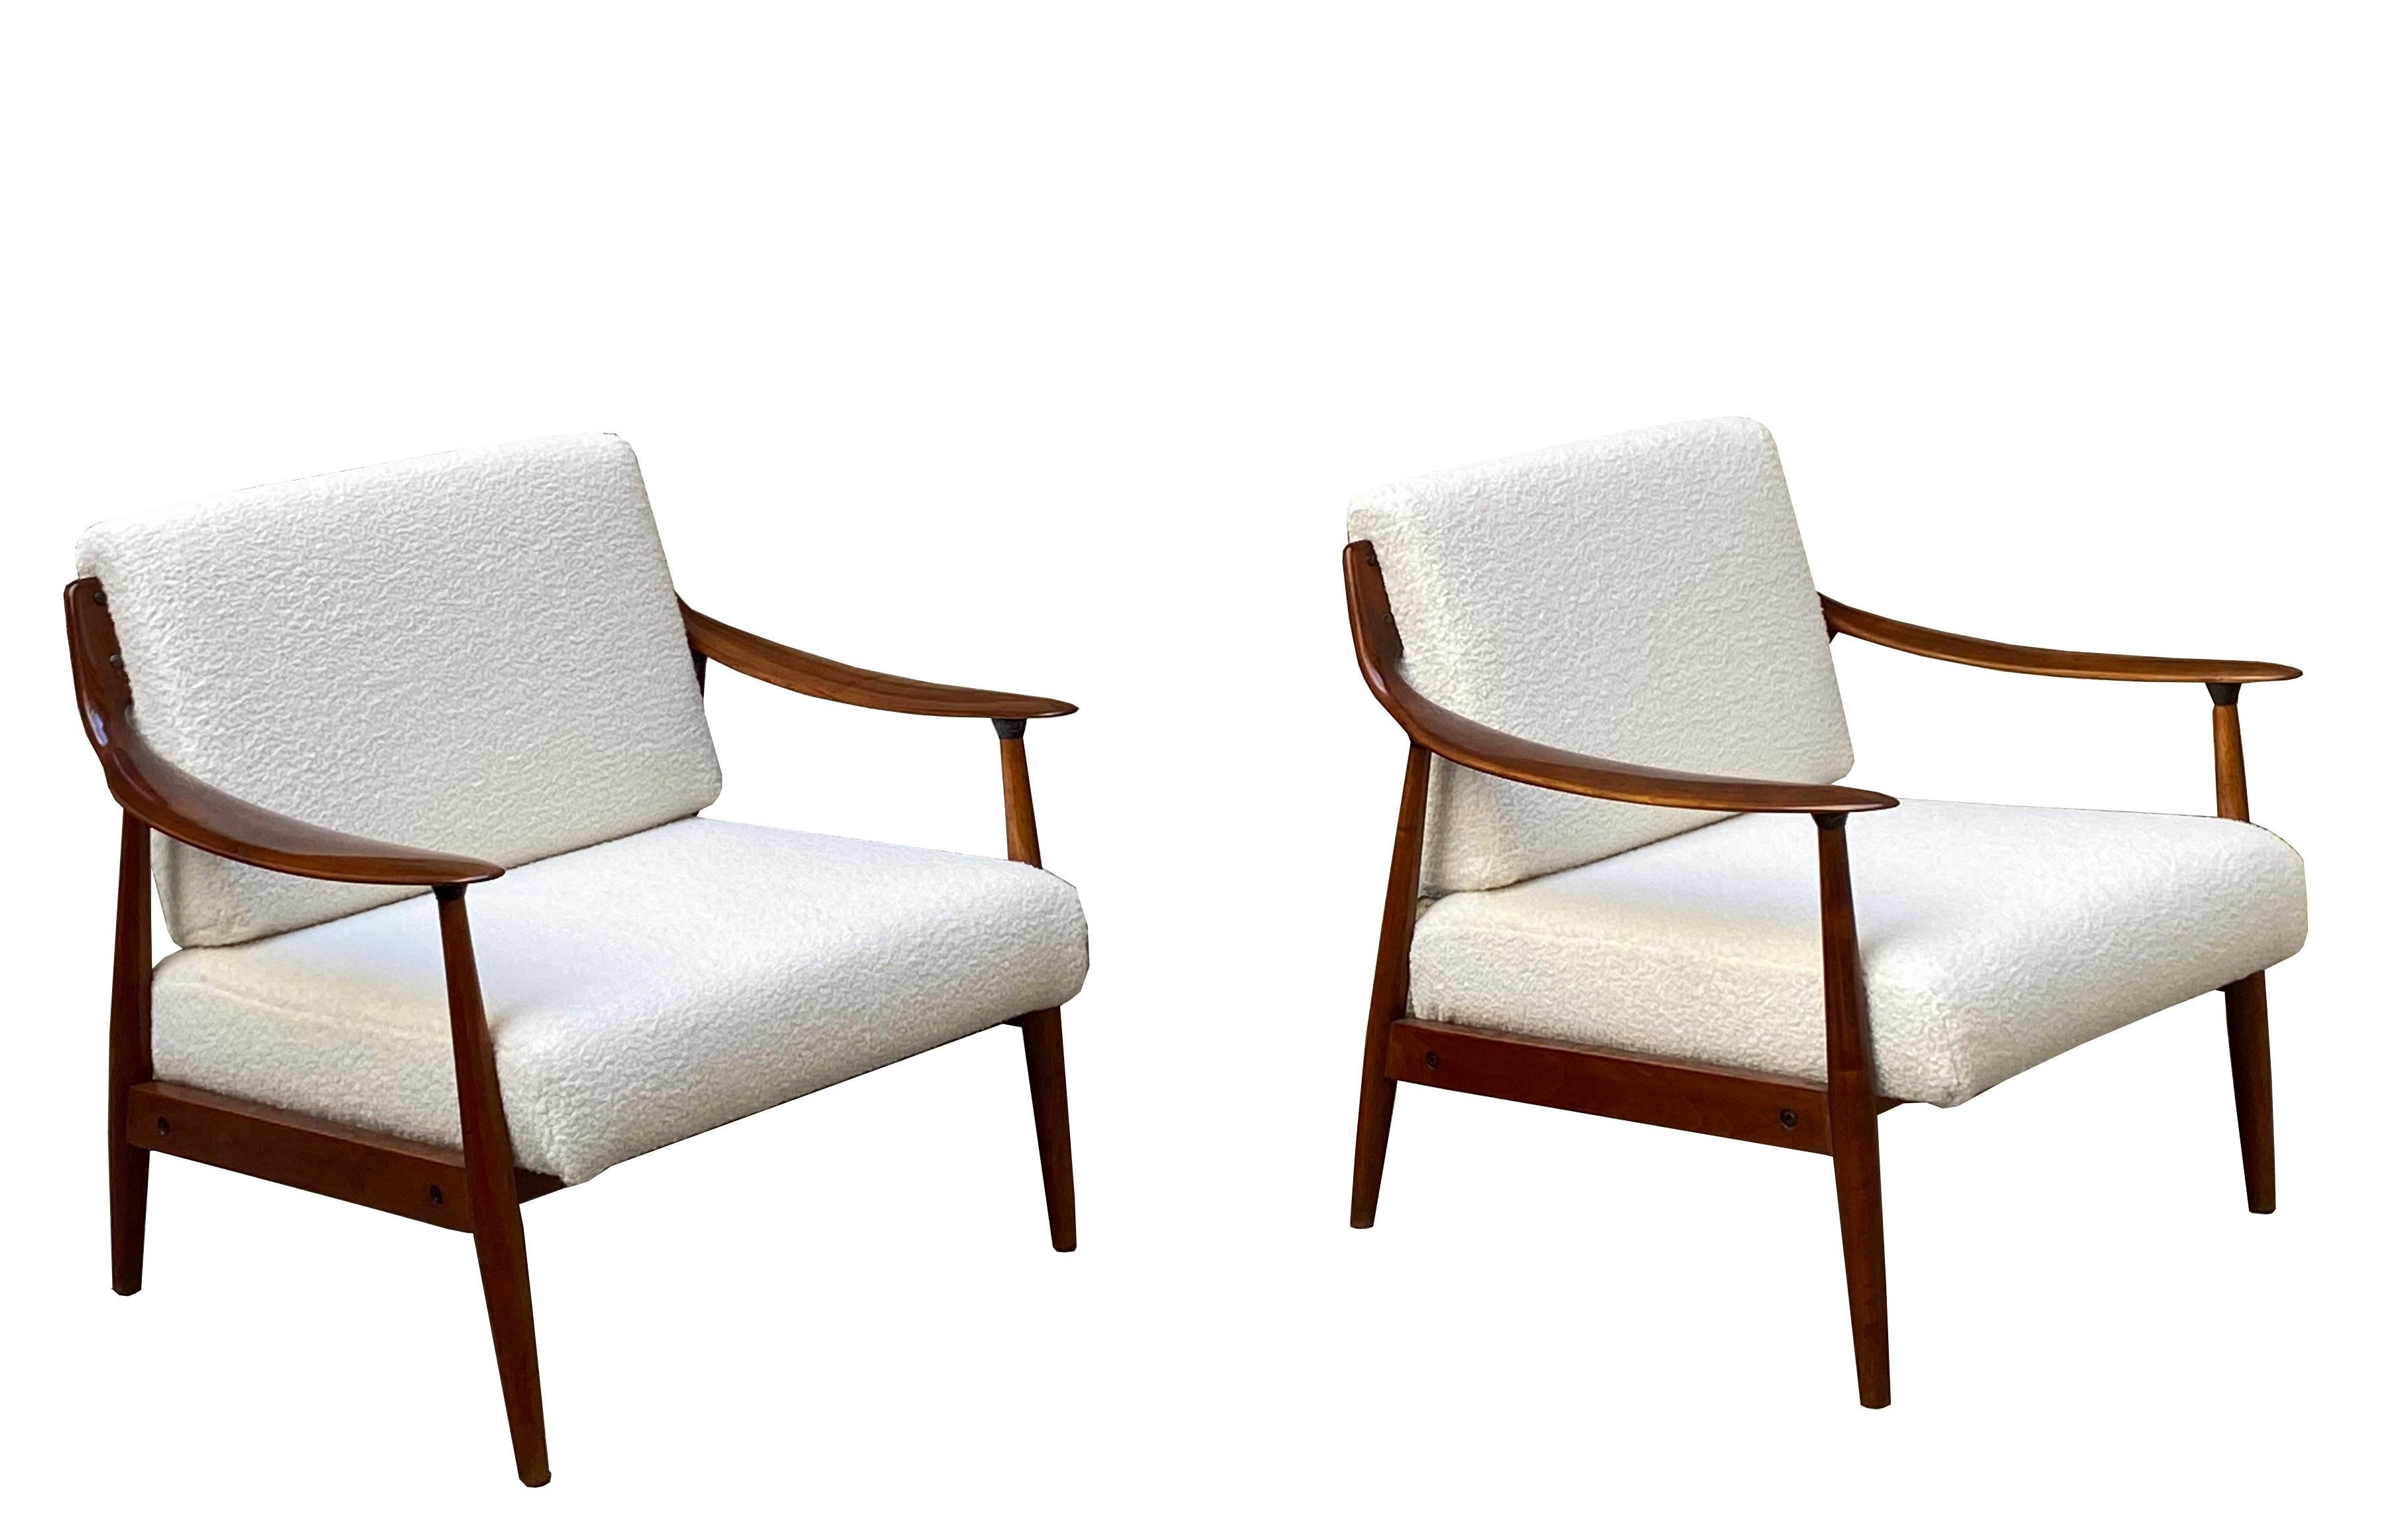 Pair of comfortable and impressive Danish armchairs with minimalist teak frame and wide upholstered seat and back.
The frame and legs are made of solid wood. The small details not only add to the originality and unique character of this piece of